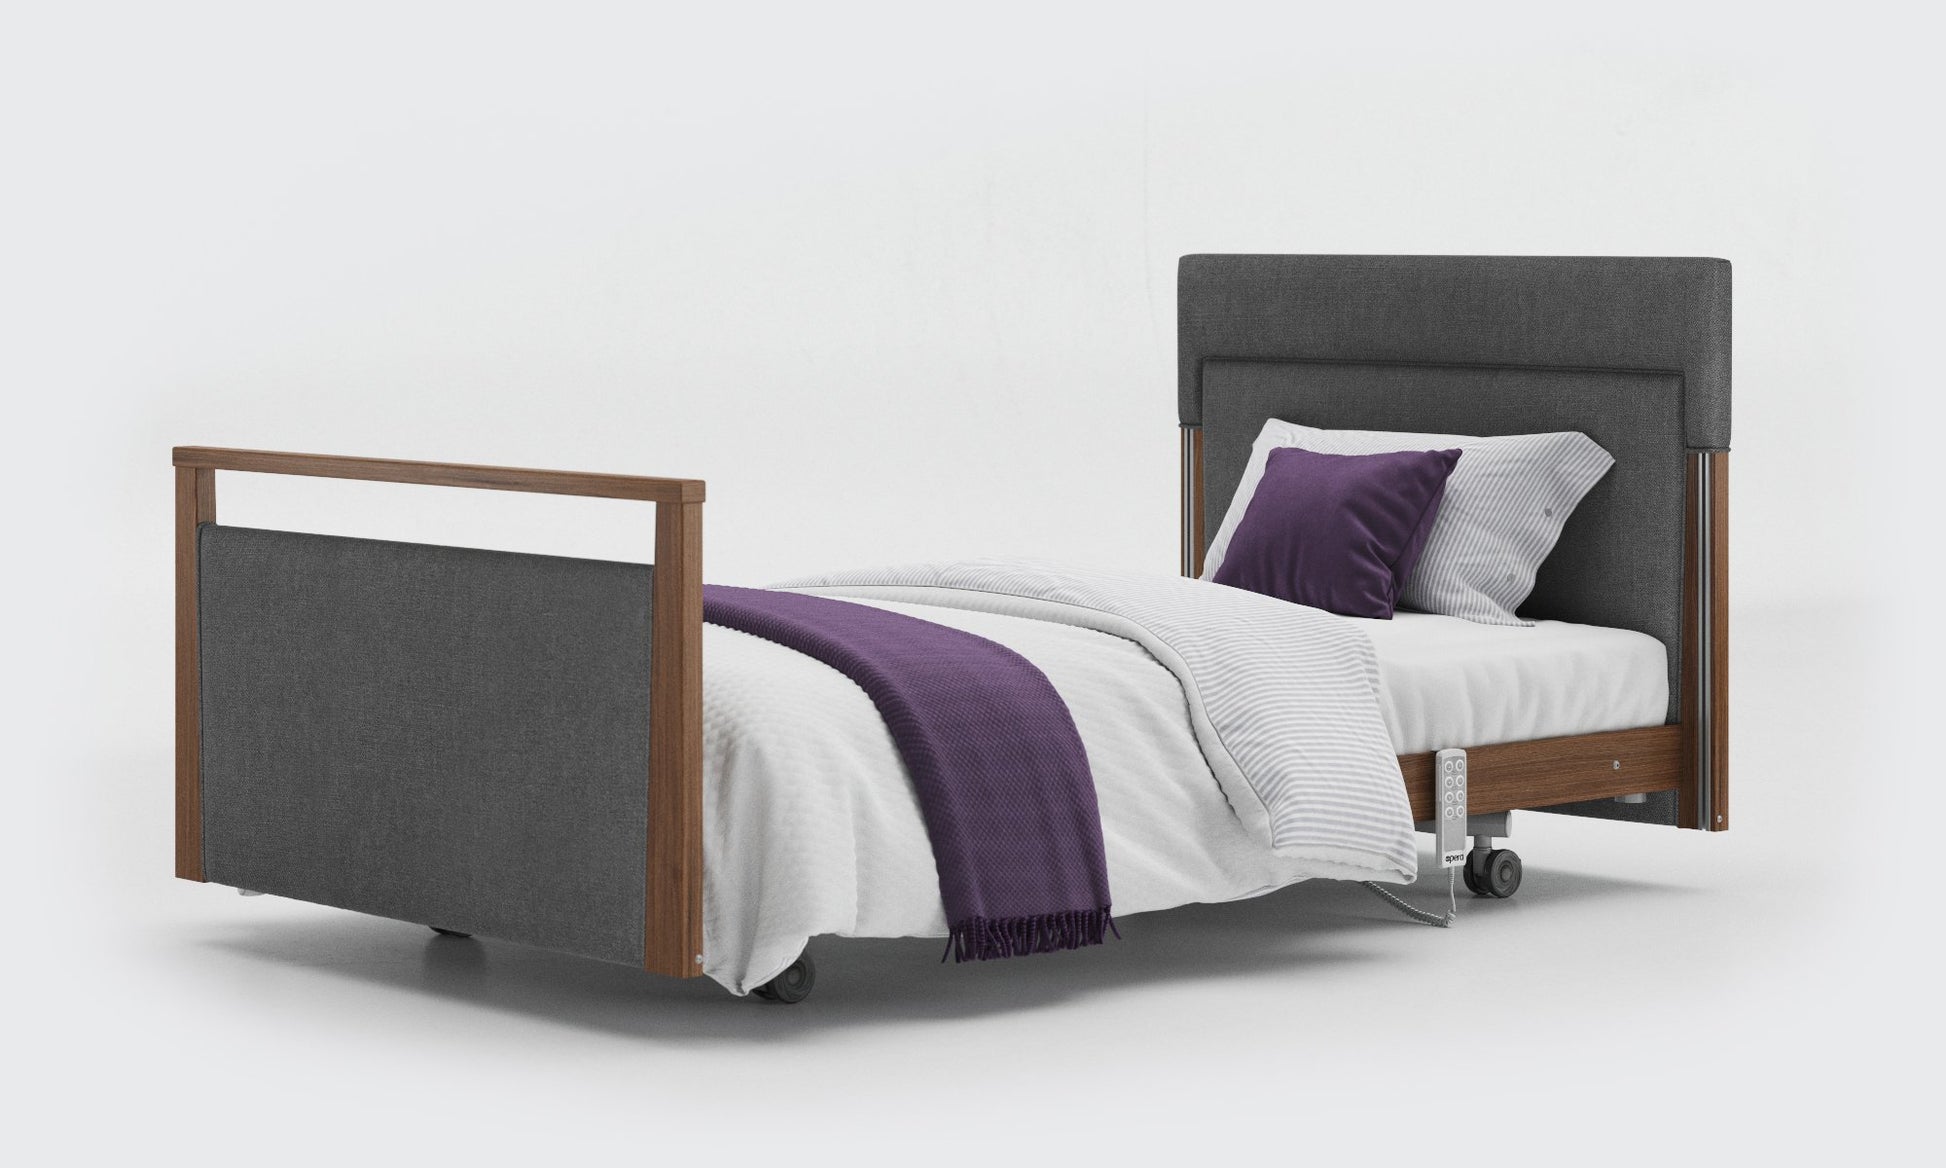 Signature bed upholstered 3ft6 without rails in walnut in Anthracite fabric